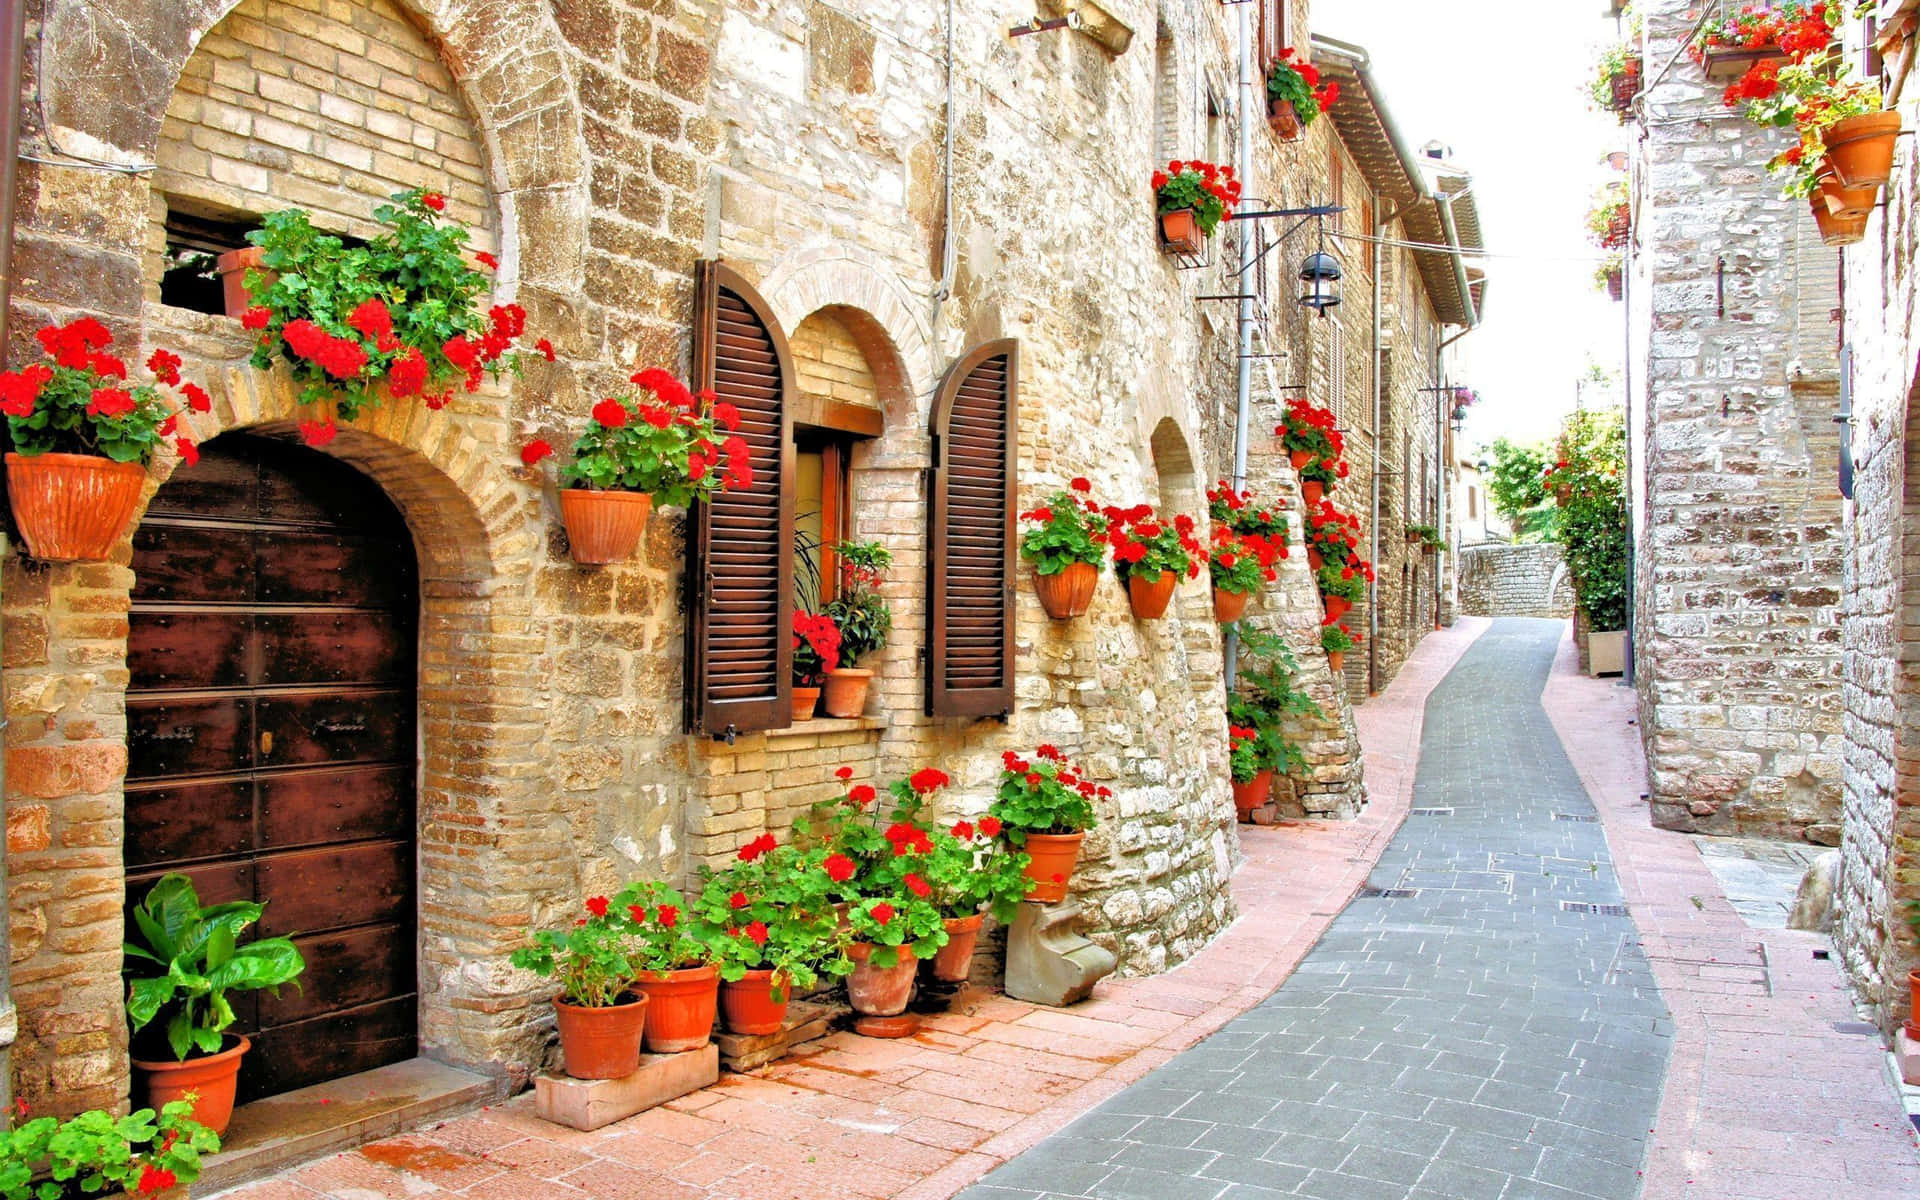 Be charmed by the picturesque beauty of Italy